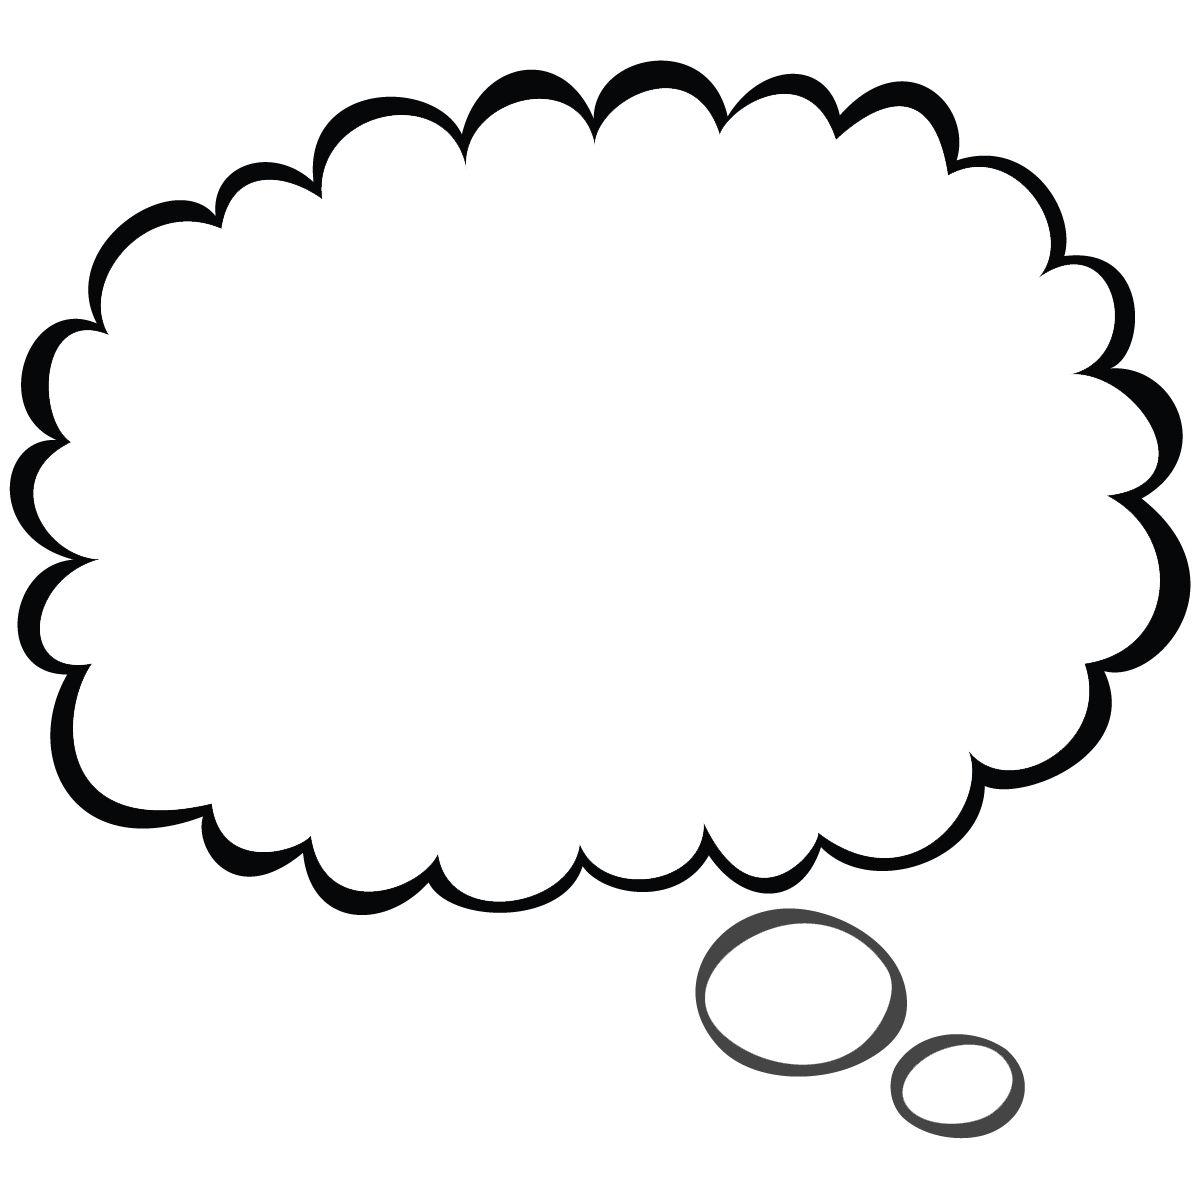 Thought bubble thought cloud clip art at vector clip art